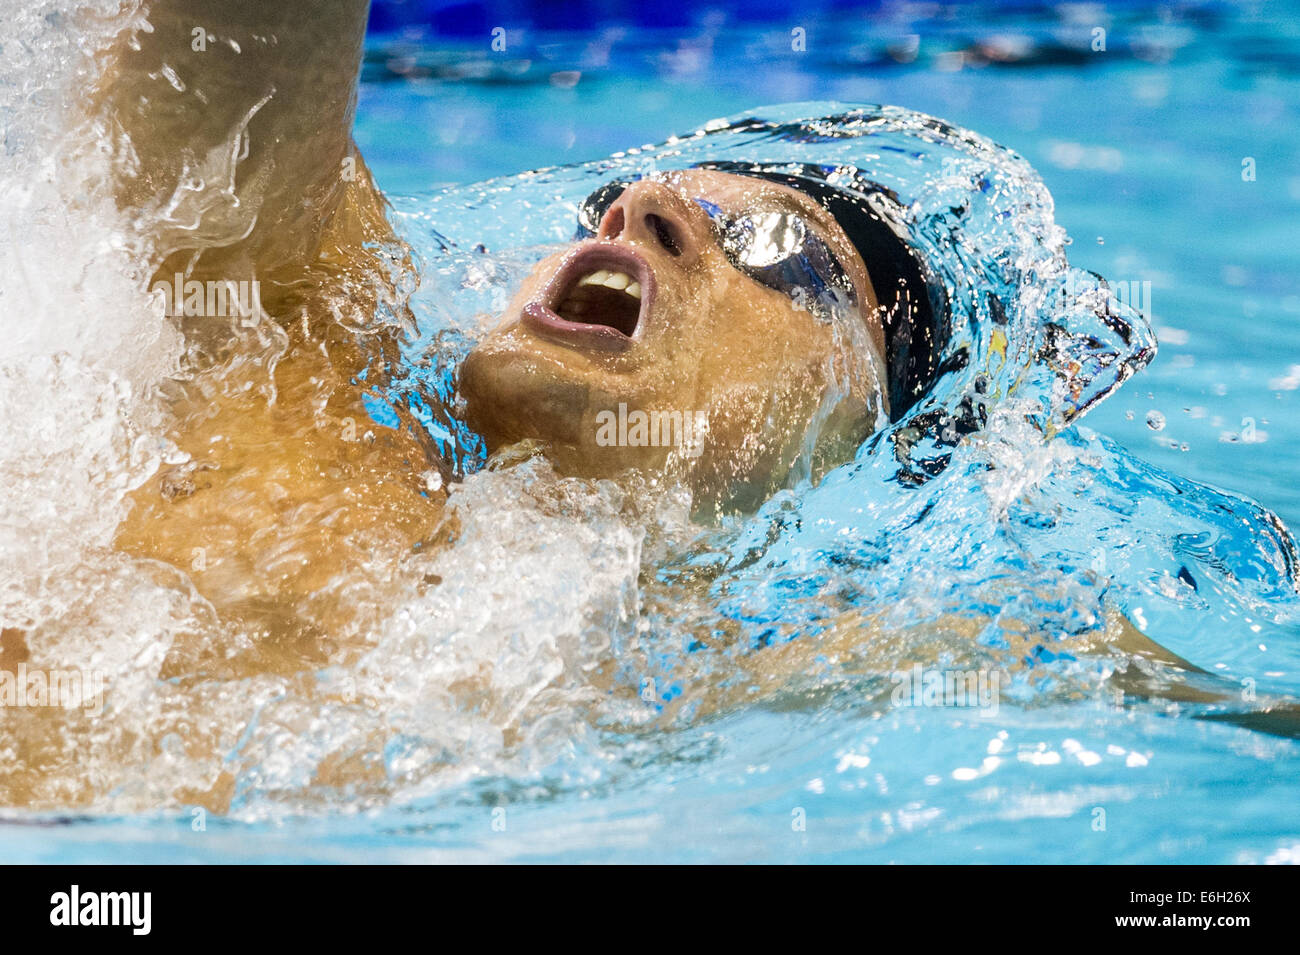 Berlin, Germany. 23rd Aug, 2014. Christian Diener of Germany competes at the men's 200m Backstroke Final at the 32nd LEN European Swimming Championships 2014 at the Velodrom in Berlin, Germany, 23 August 2014. Photo: Maja Hitij/dpa/Alamy Live News Stock Photo